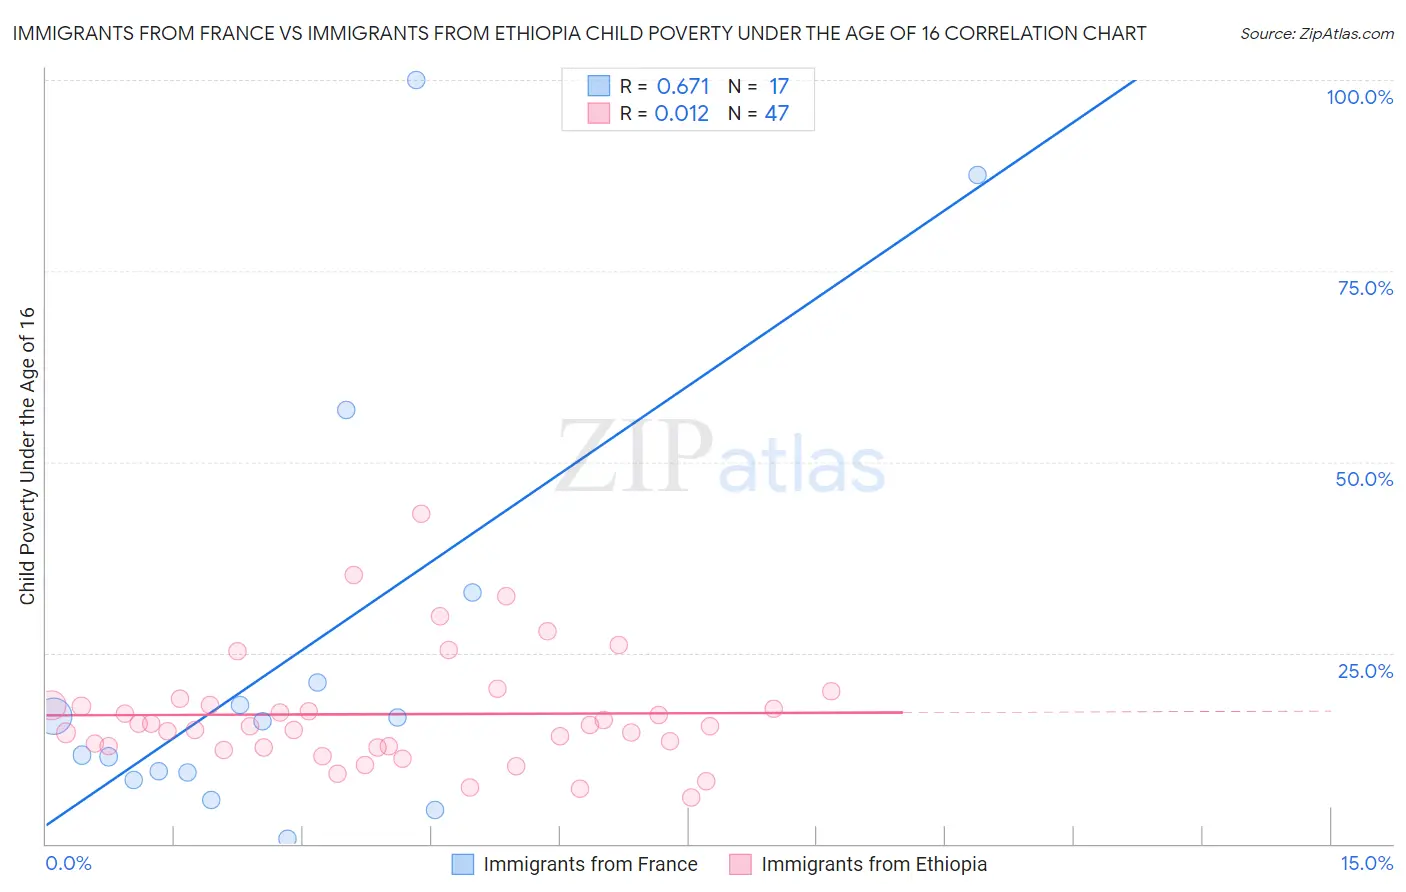 Immigrants from France vs Immigrants from Ethiopia Child Poverty Under the Age of 16